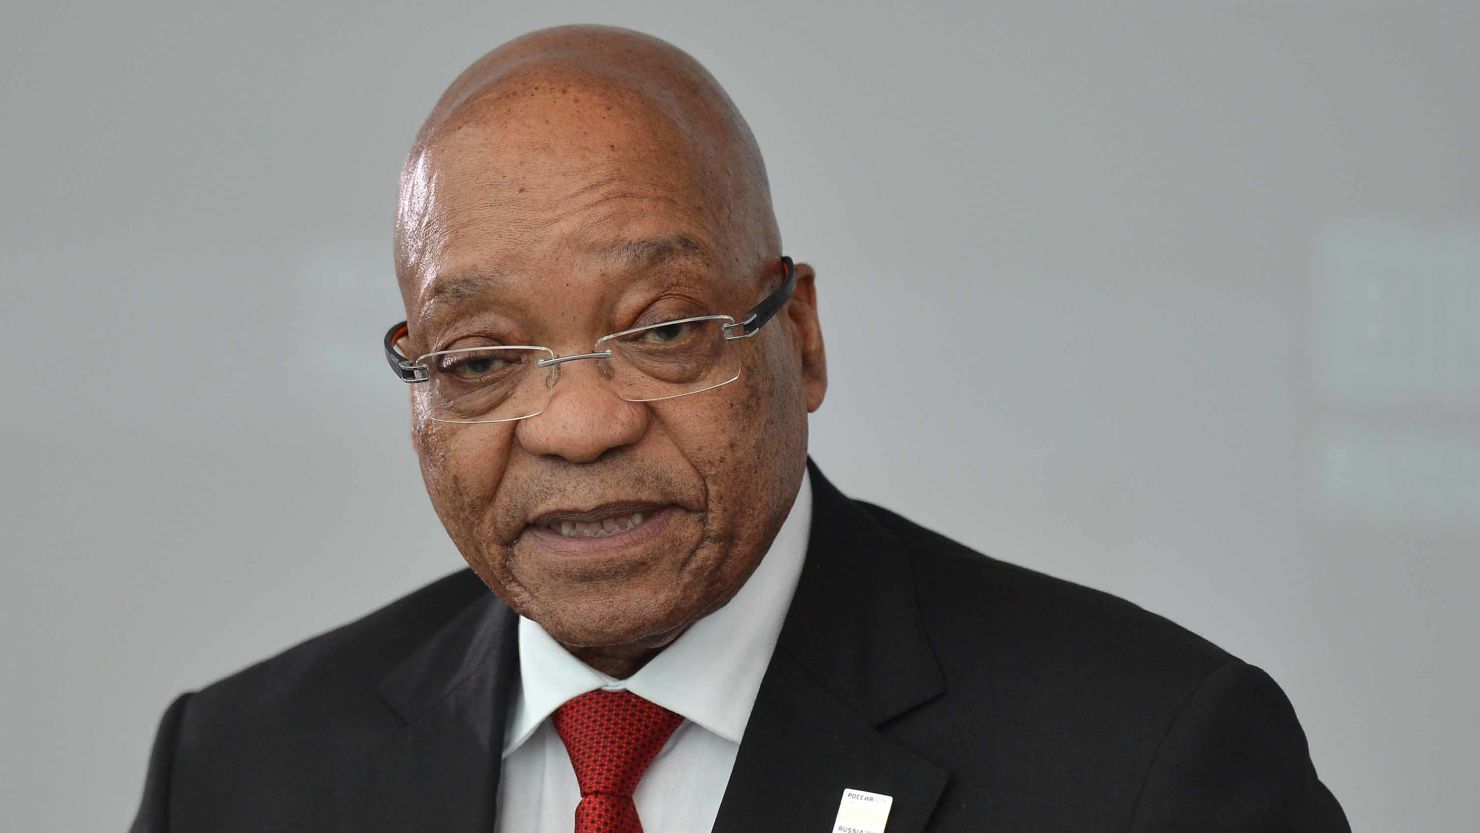 Former President of South Africa Jacob Zuma pictured at the BRICS Summit in Ufa, Russia on July 9, 2015.